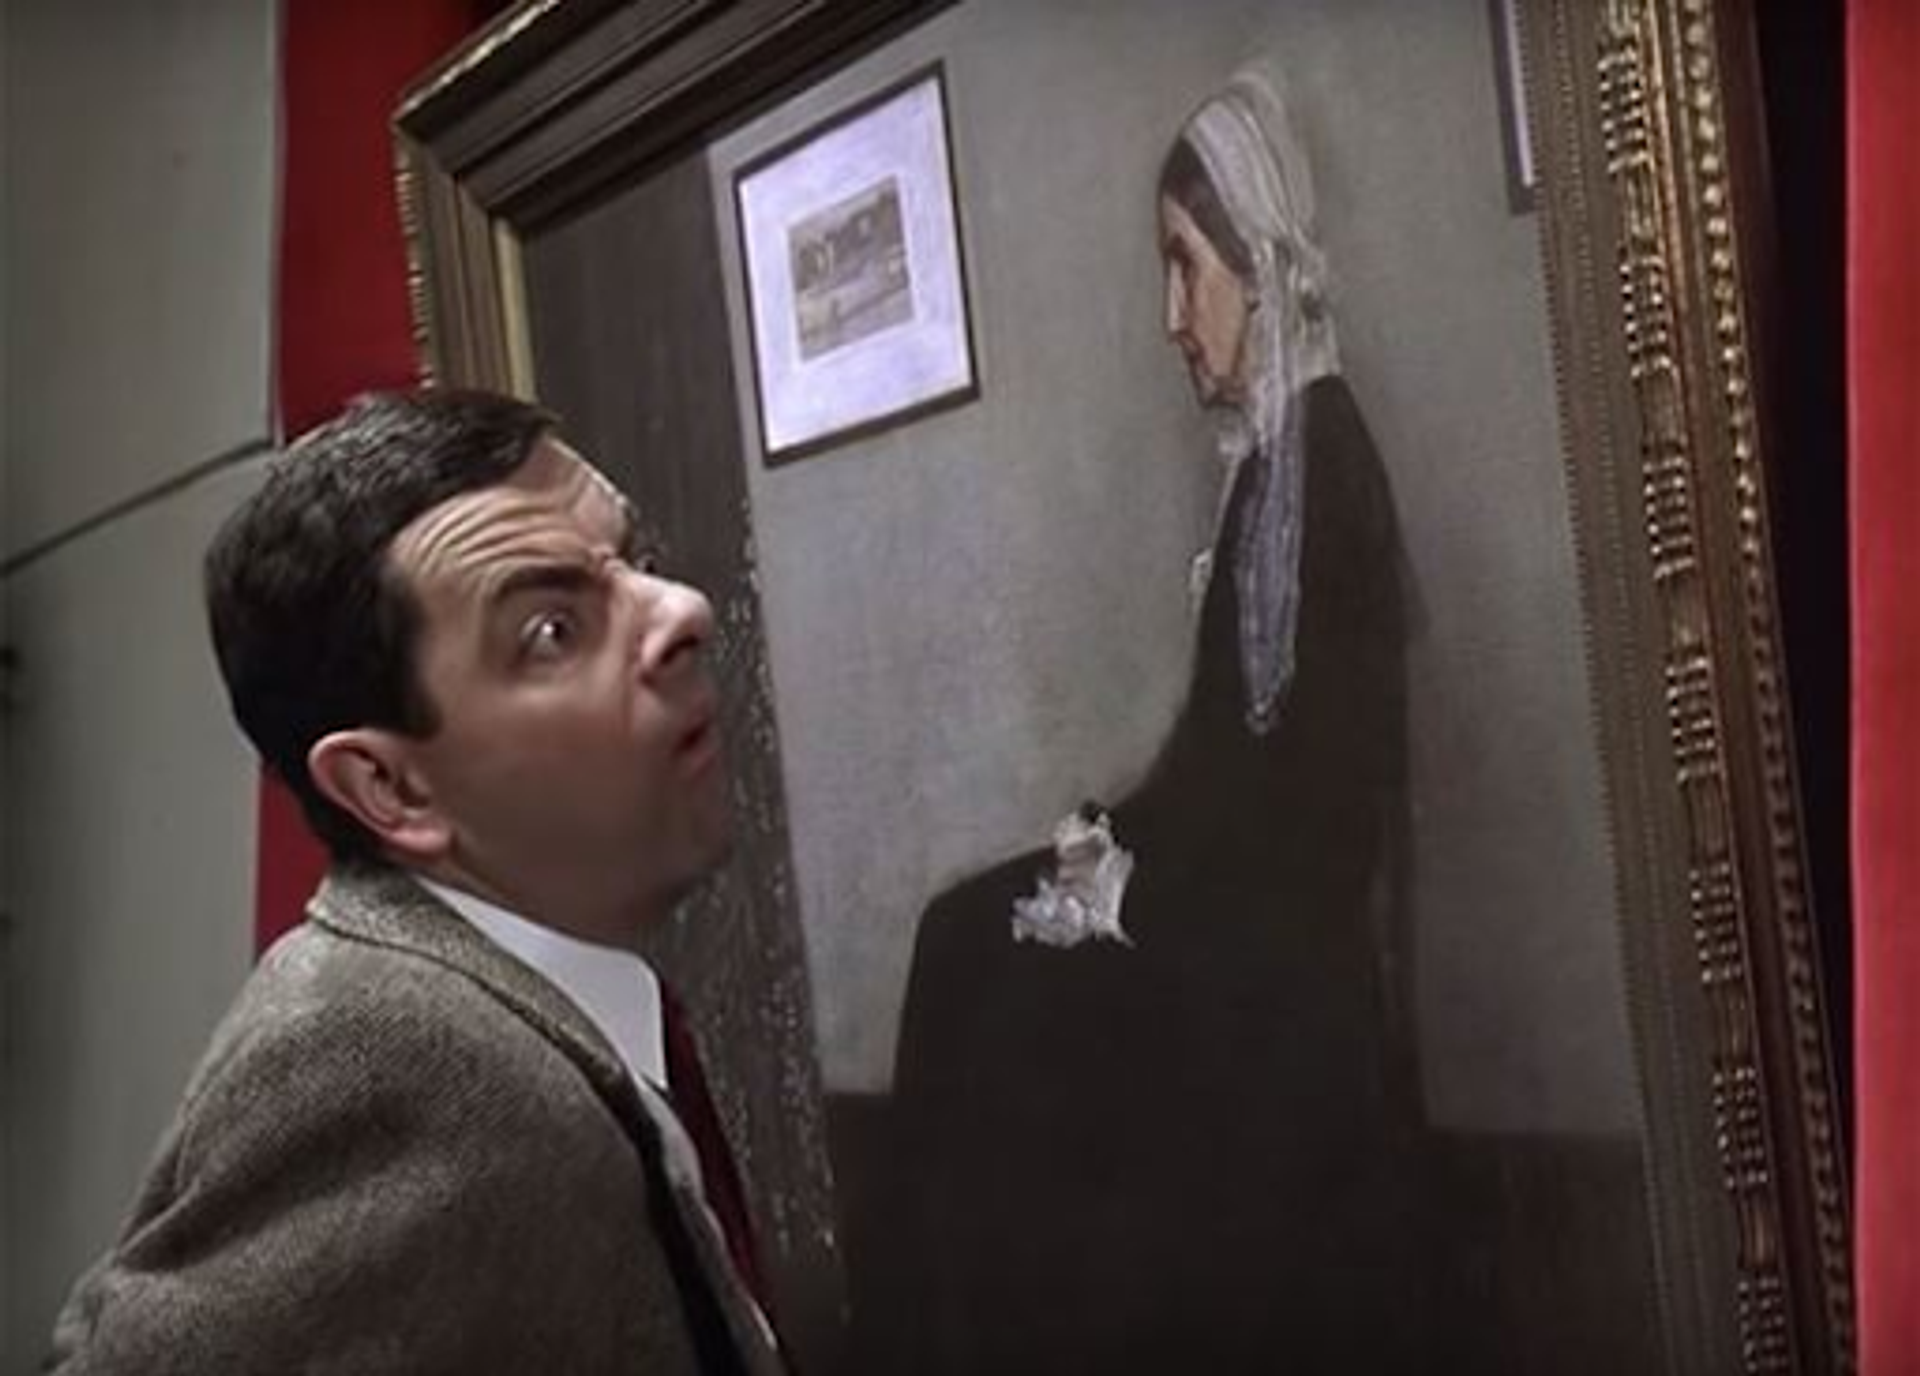 Photograph from the film production, Bean. A man closely staring at a fine art portrait.